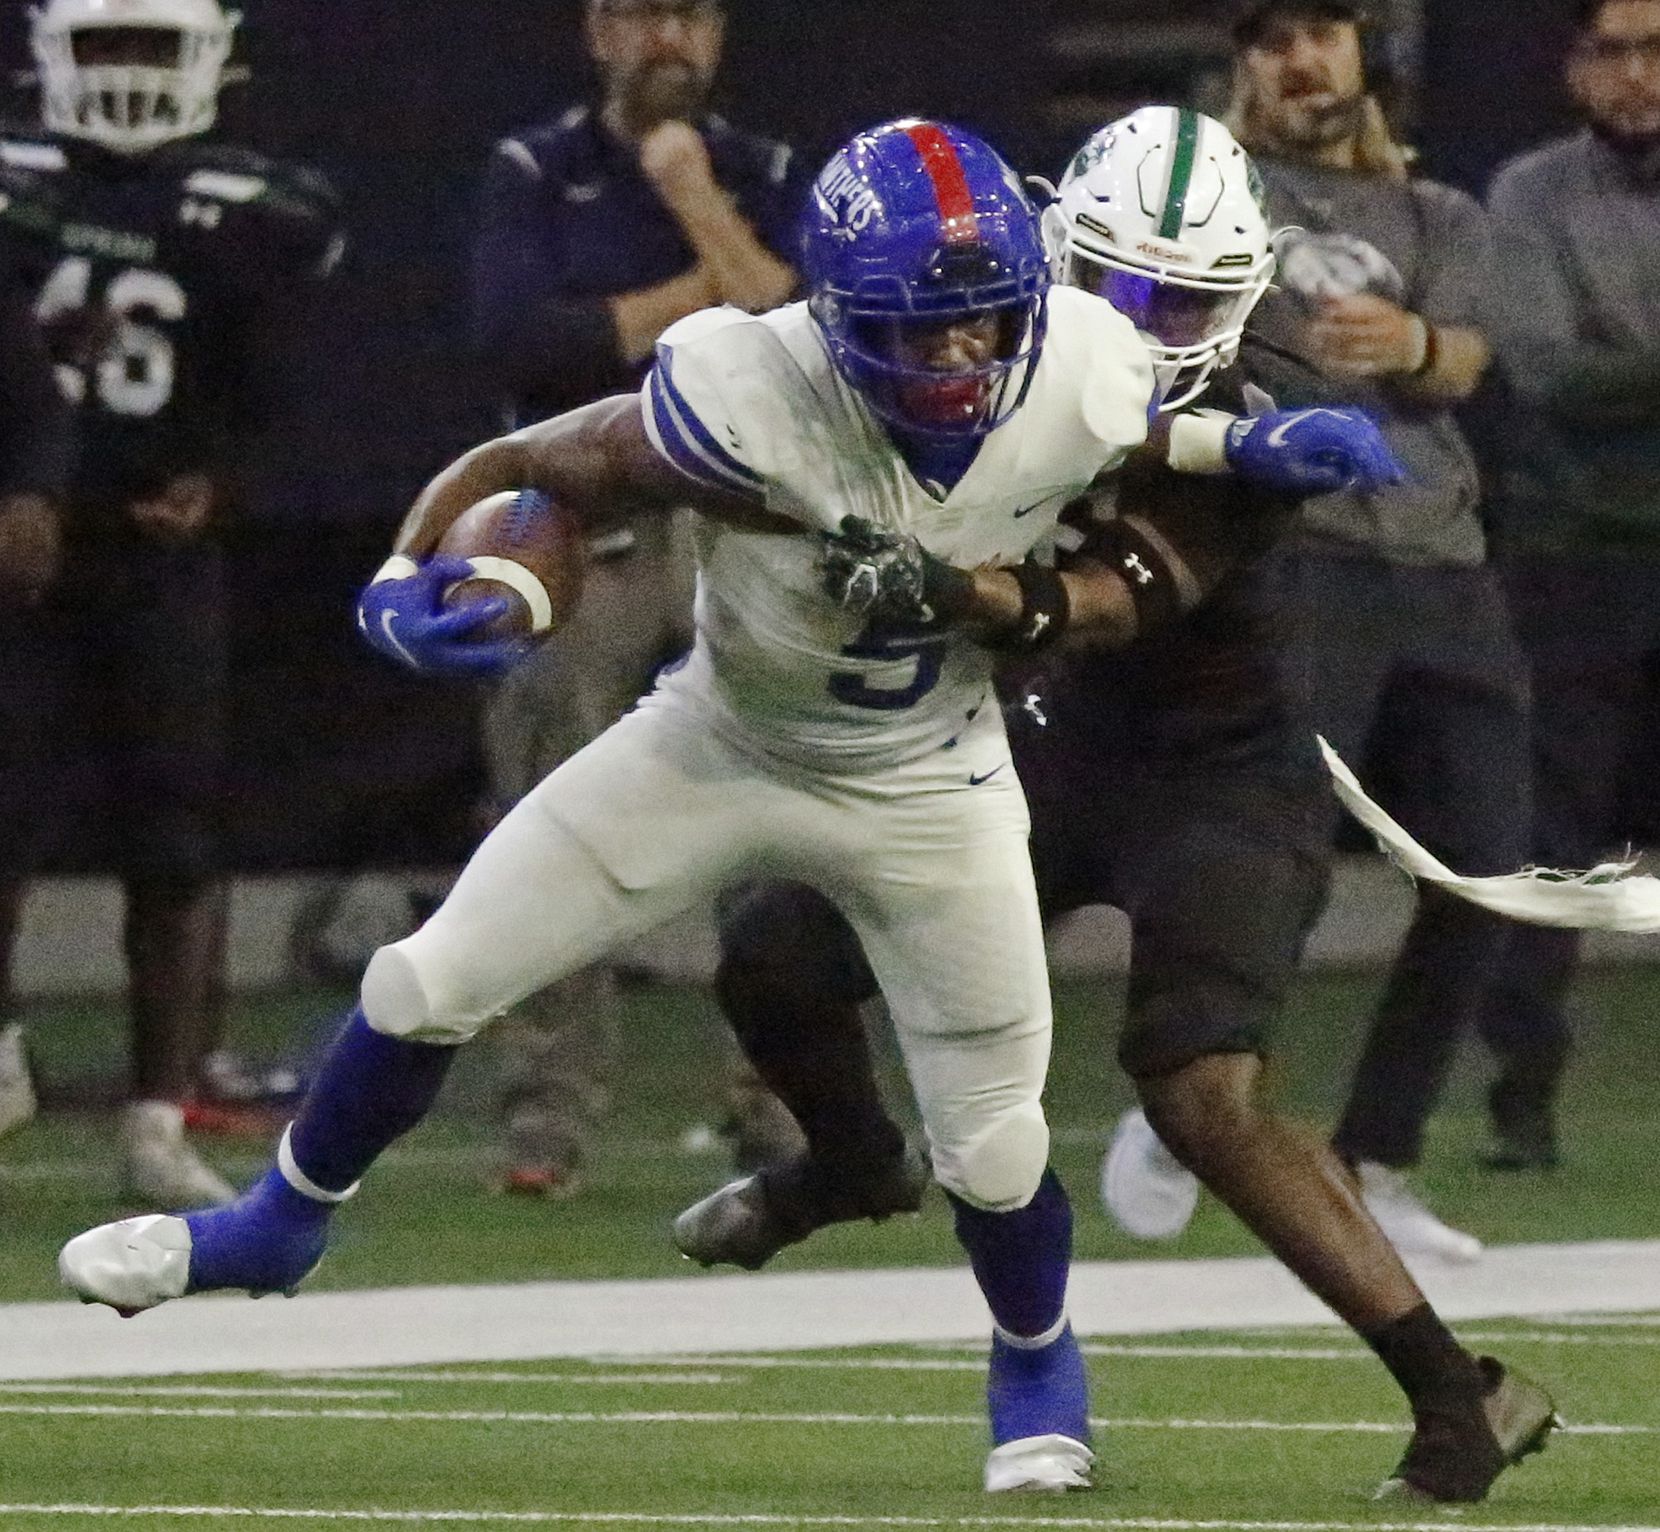 Duncanville High School running back Malachi Medlock (5) is held up by Spring High School defensive back Bruce Davis (6) during the first half as Duncanville High School played Spring High School in a Class 6A Division I Region II semifinal football game at The Ford Center in Frisco on Saturday, November 27, 2021. (Stewart F. House/Special Contributor)